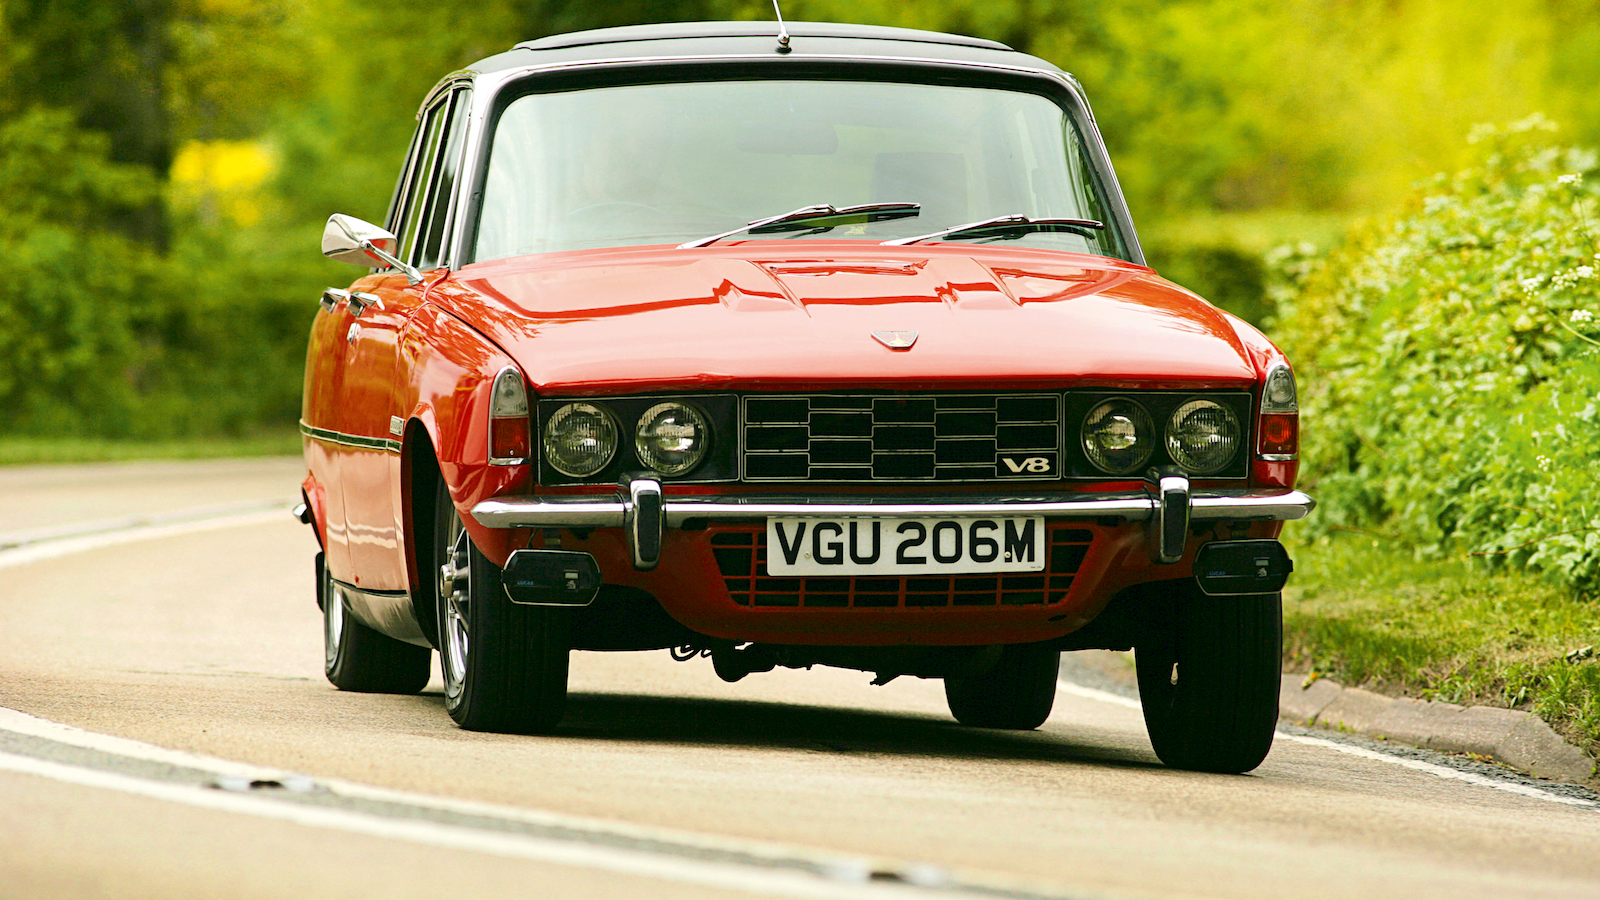 20 reasons we love the Rover V8